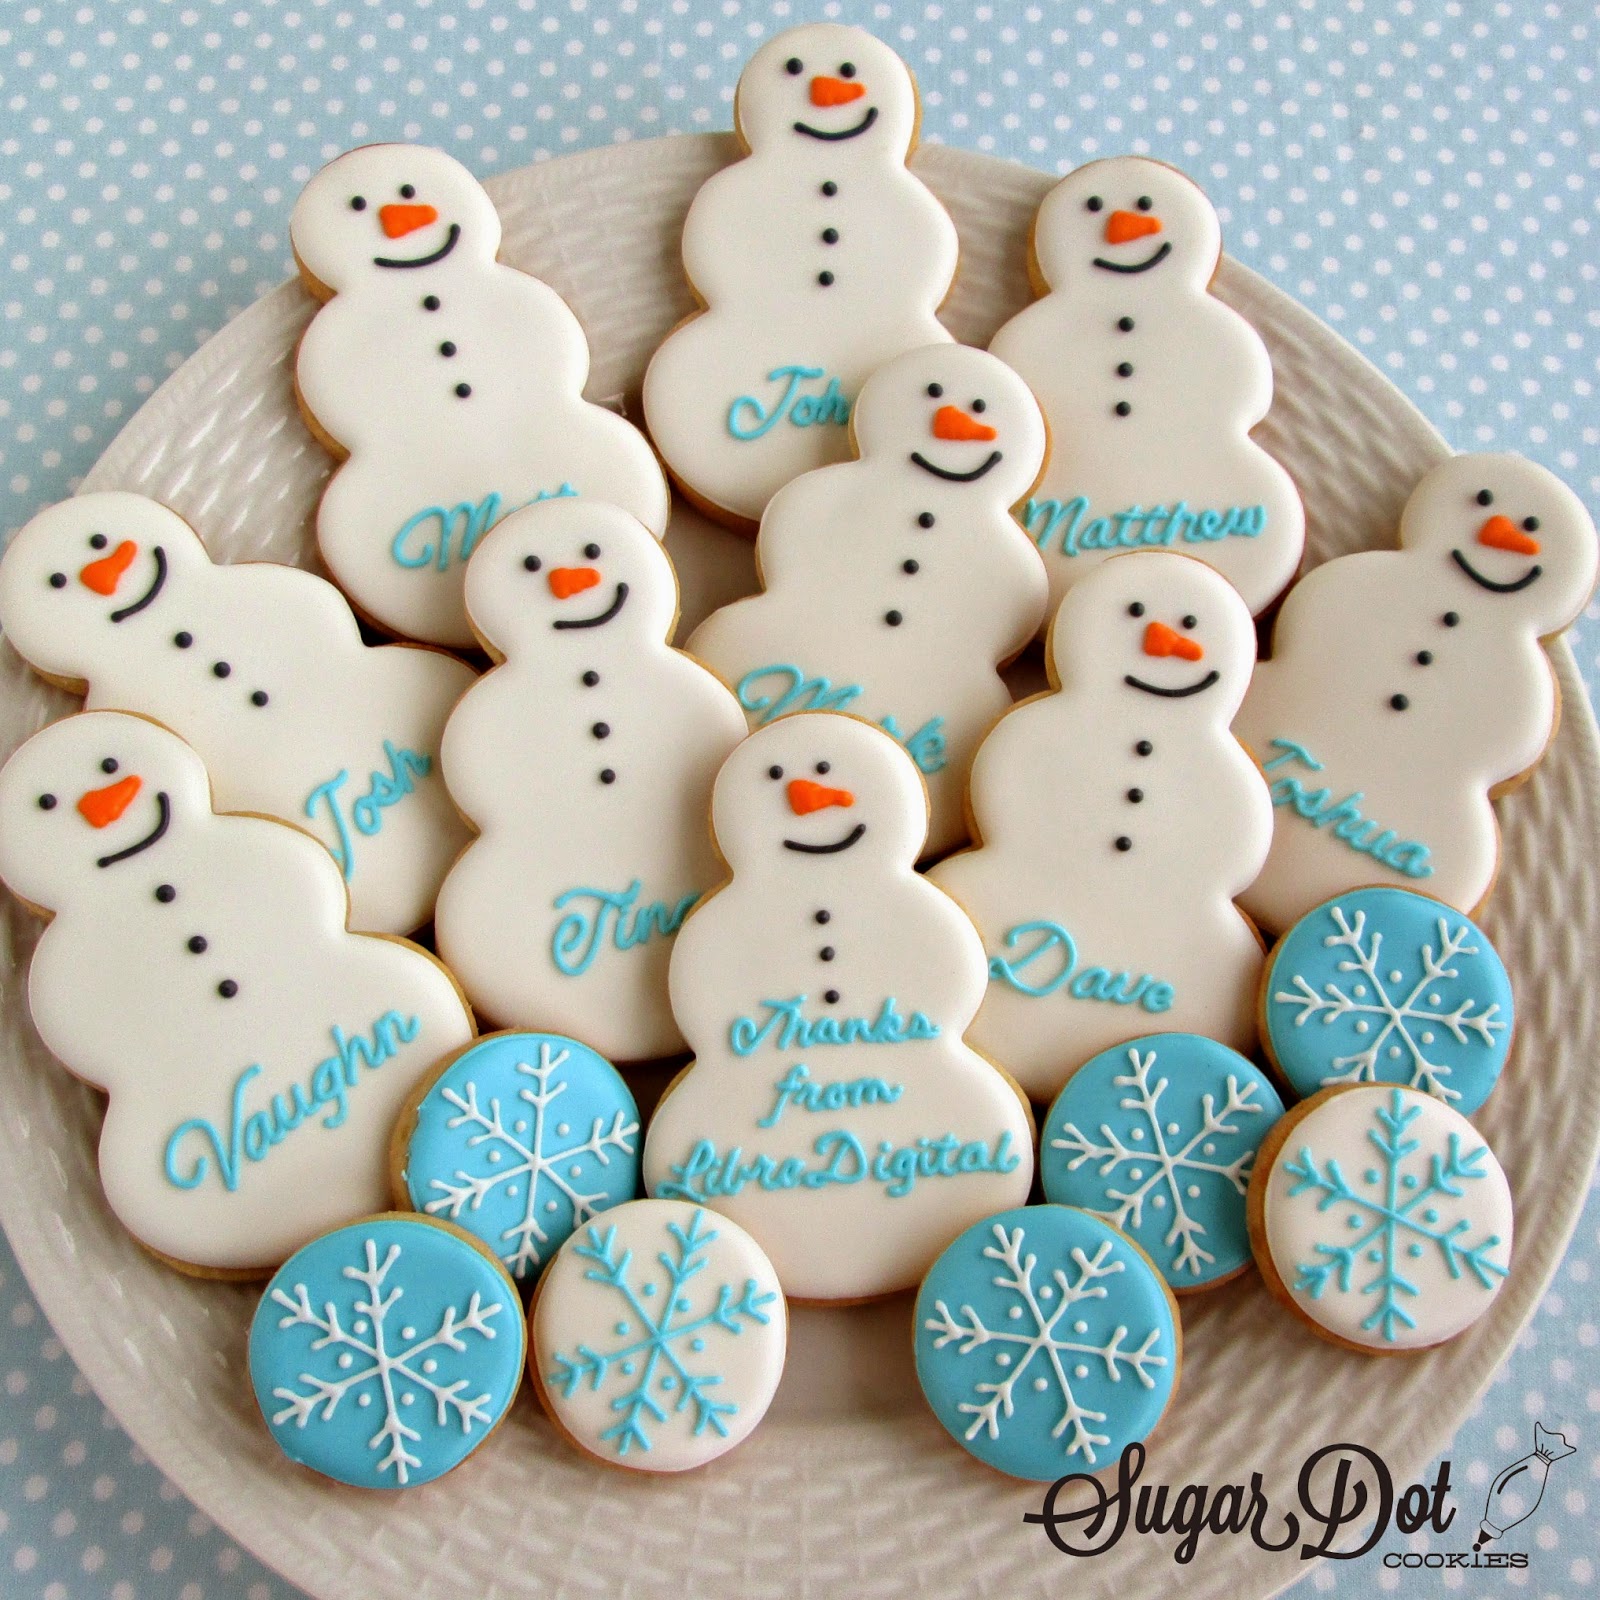 sugar dot cookies decorated custom royal icing frederick md maryland corporate christmas holiday t personalized snowman snowflake